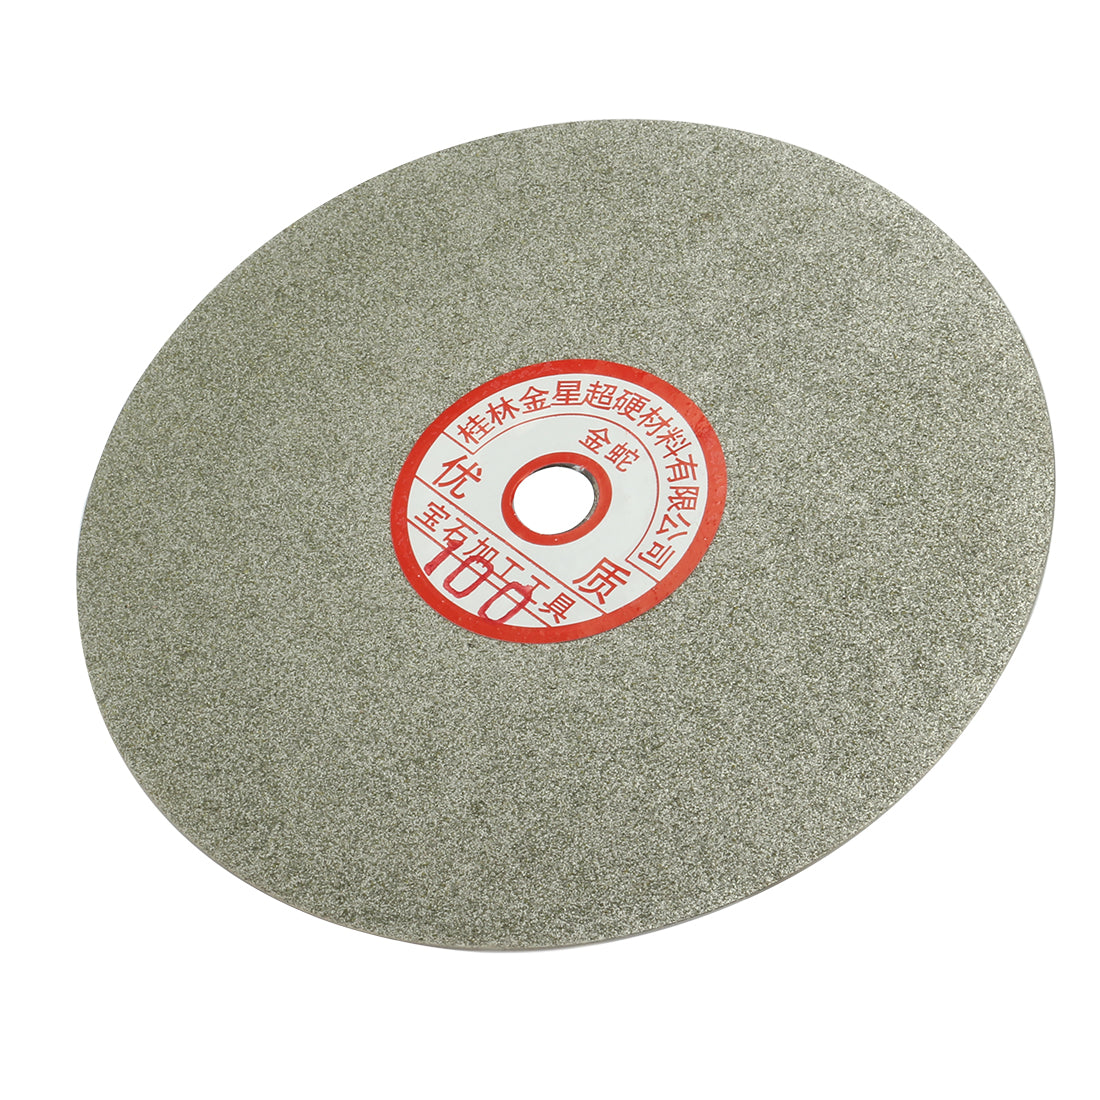 uxcell Uxcell 6-inch Grit 100 Diamond Coated Flat Lap Wheel Grinding Sanding Polishing Disc